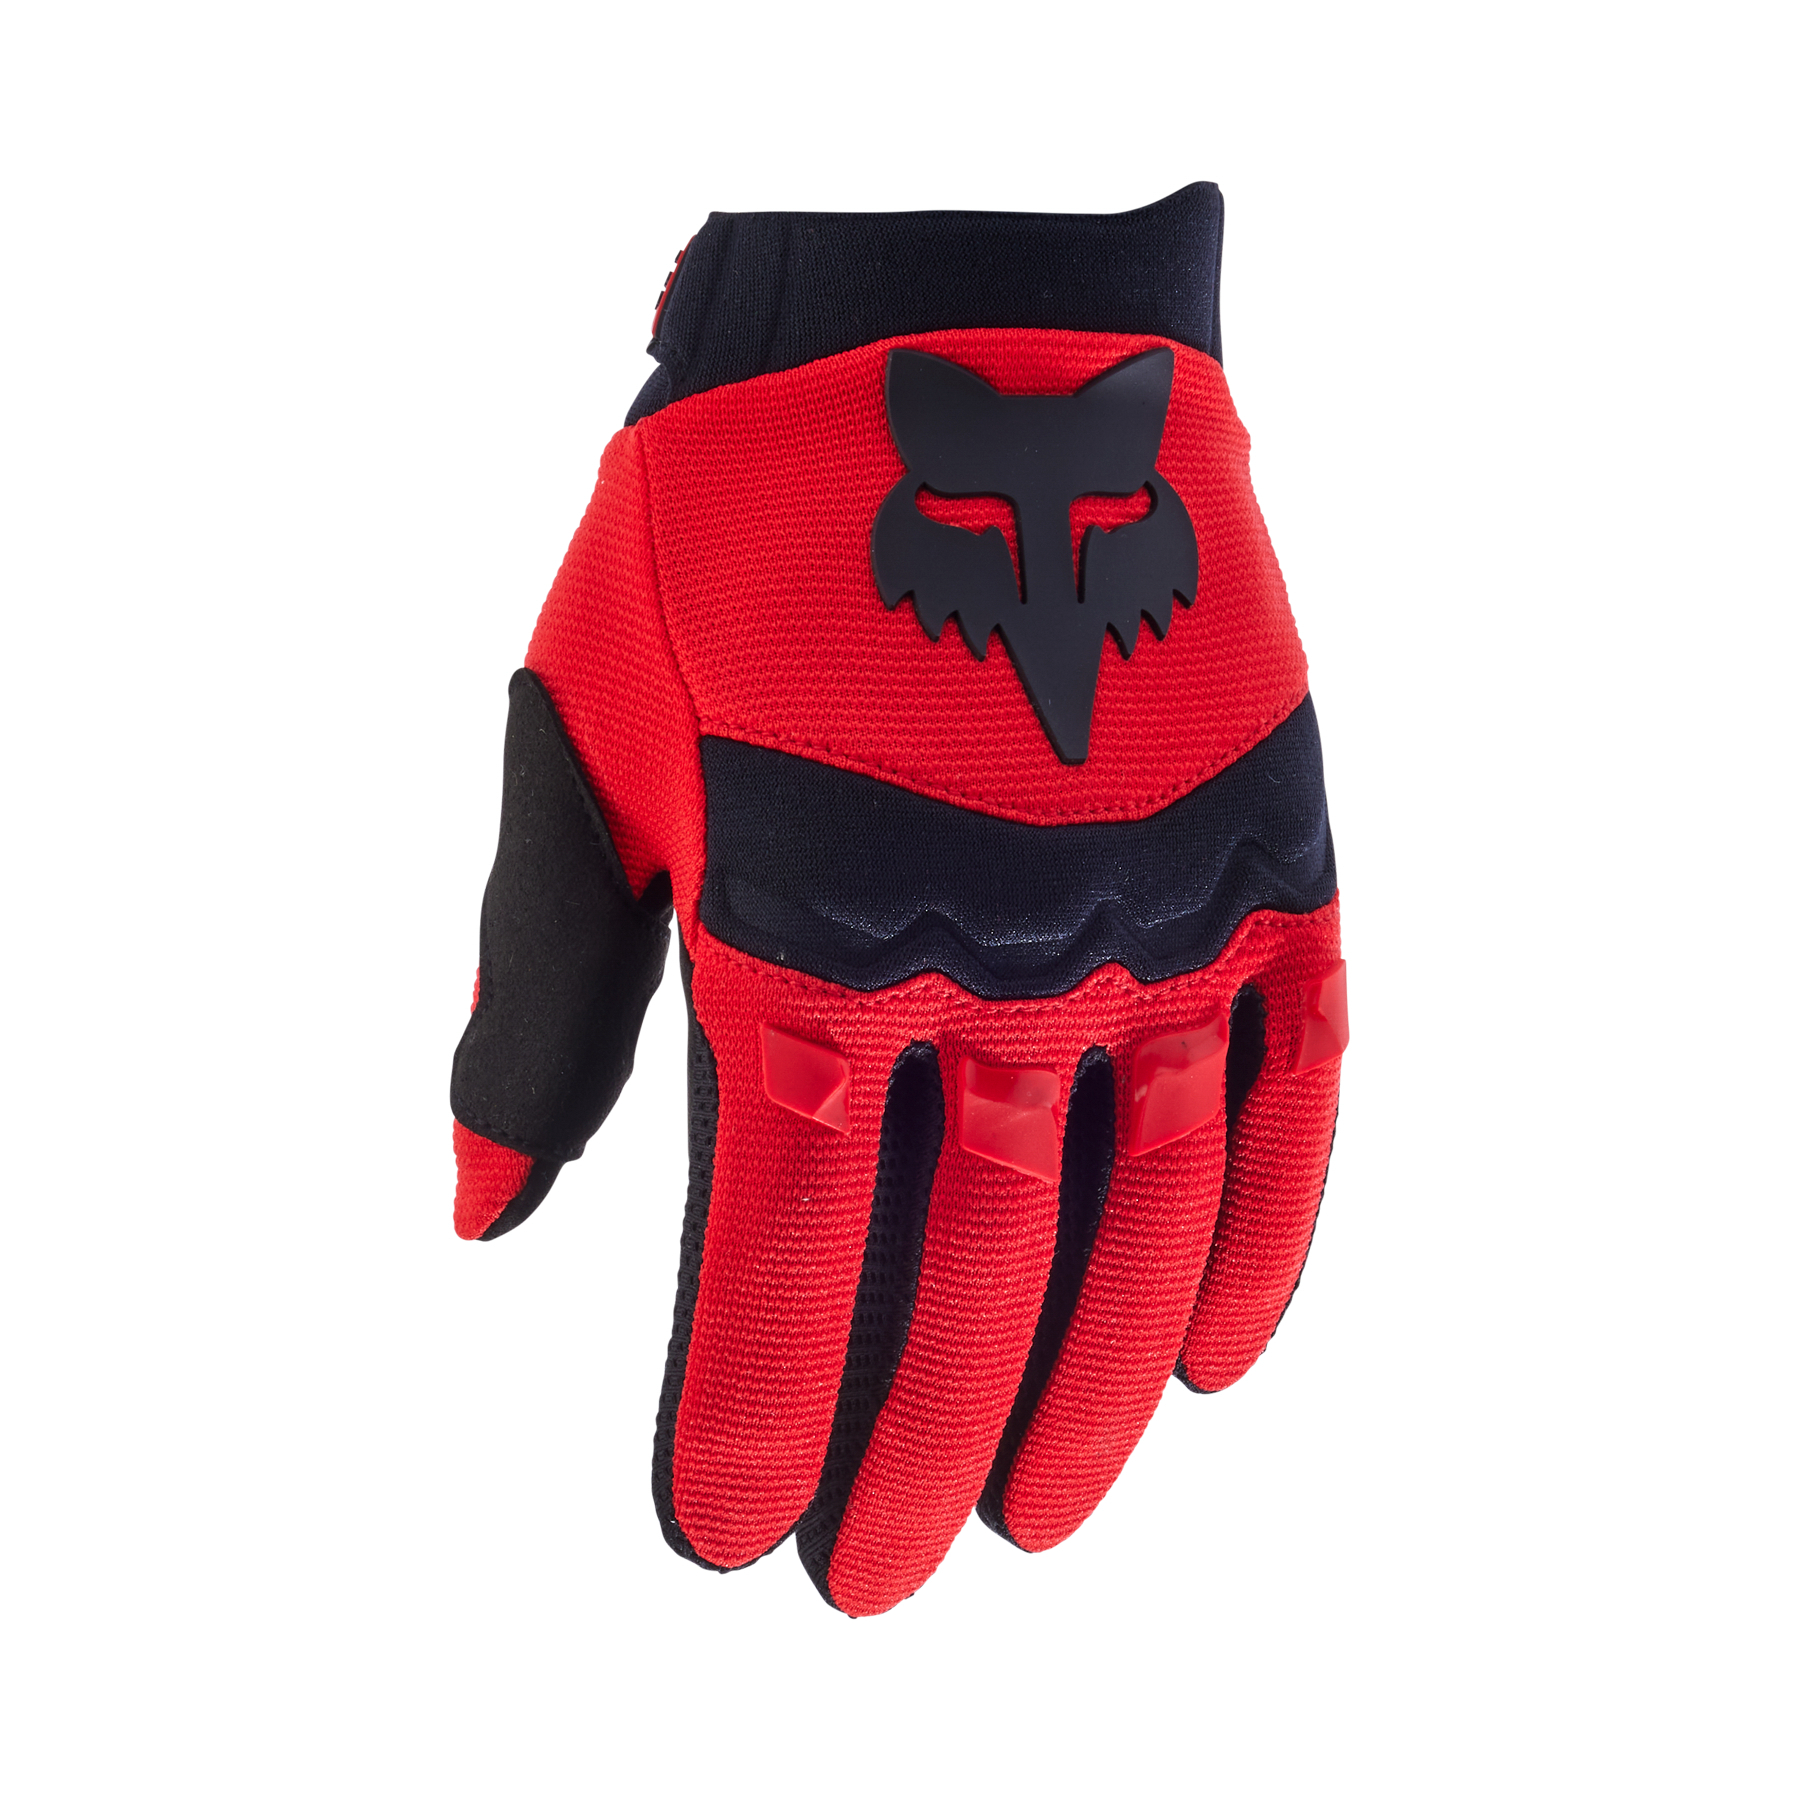 Fox Dirtpaw Youth Gloves - Youth L - Flo Red - Image 1